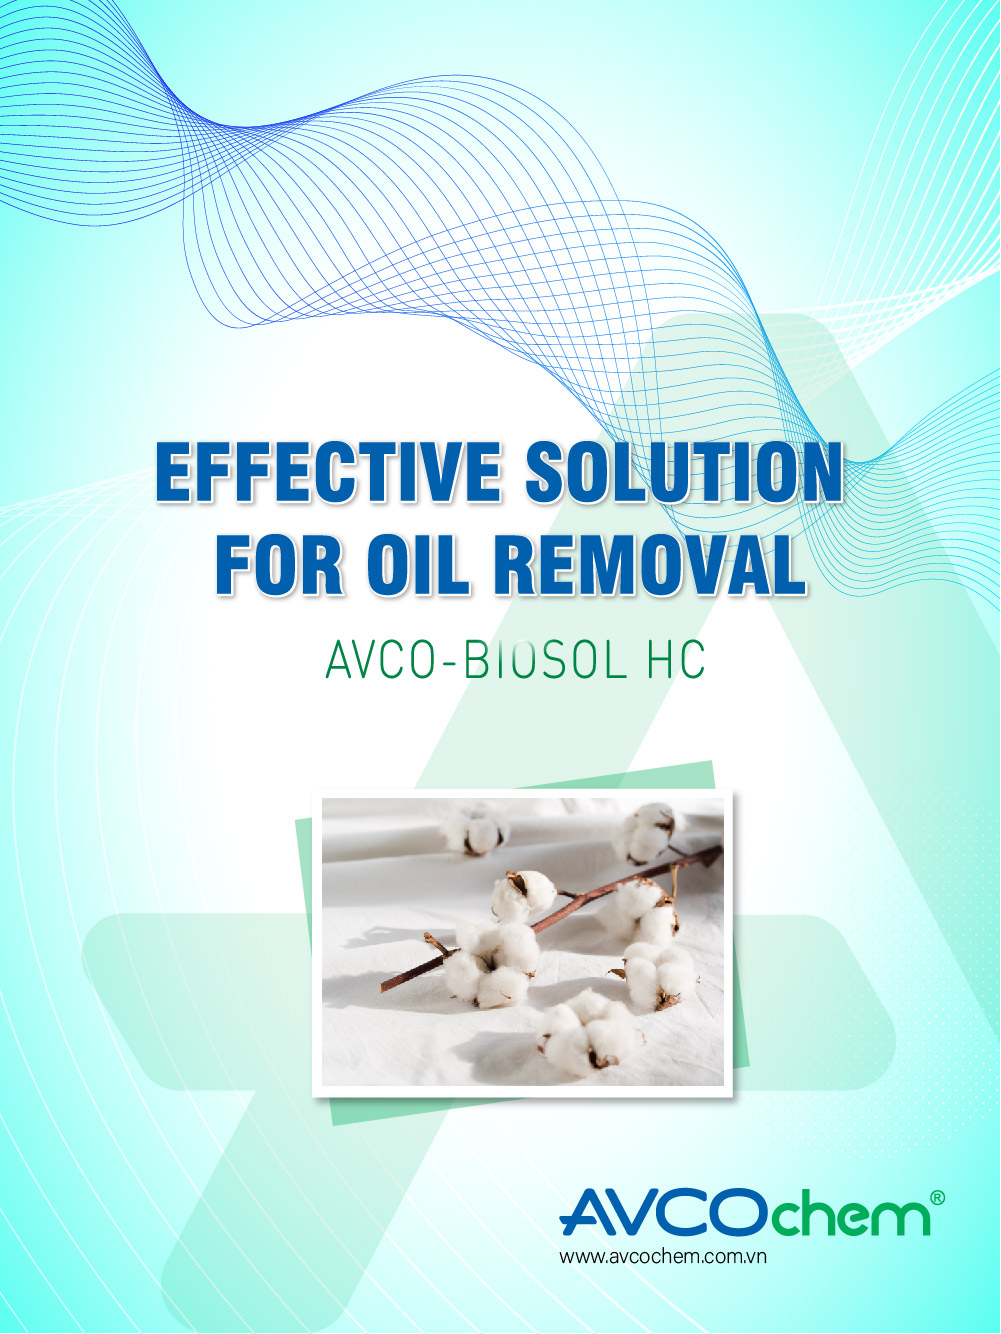 EFFECTIVE SOLUTION FOR OIL REMOVAL